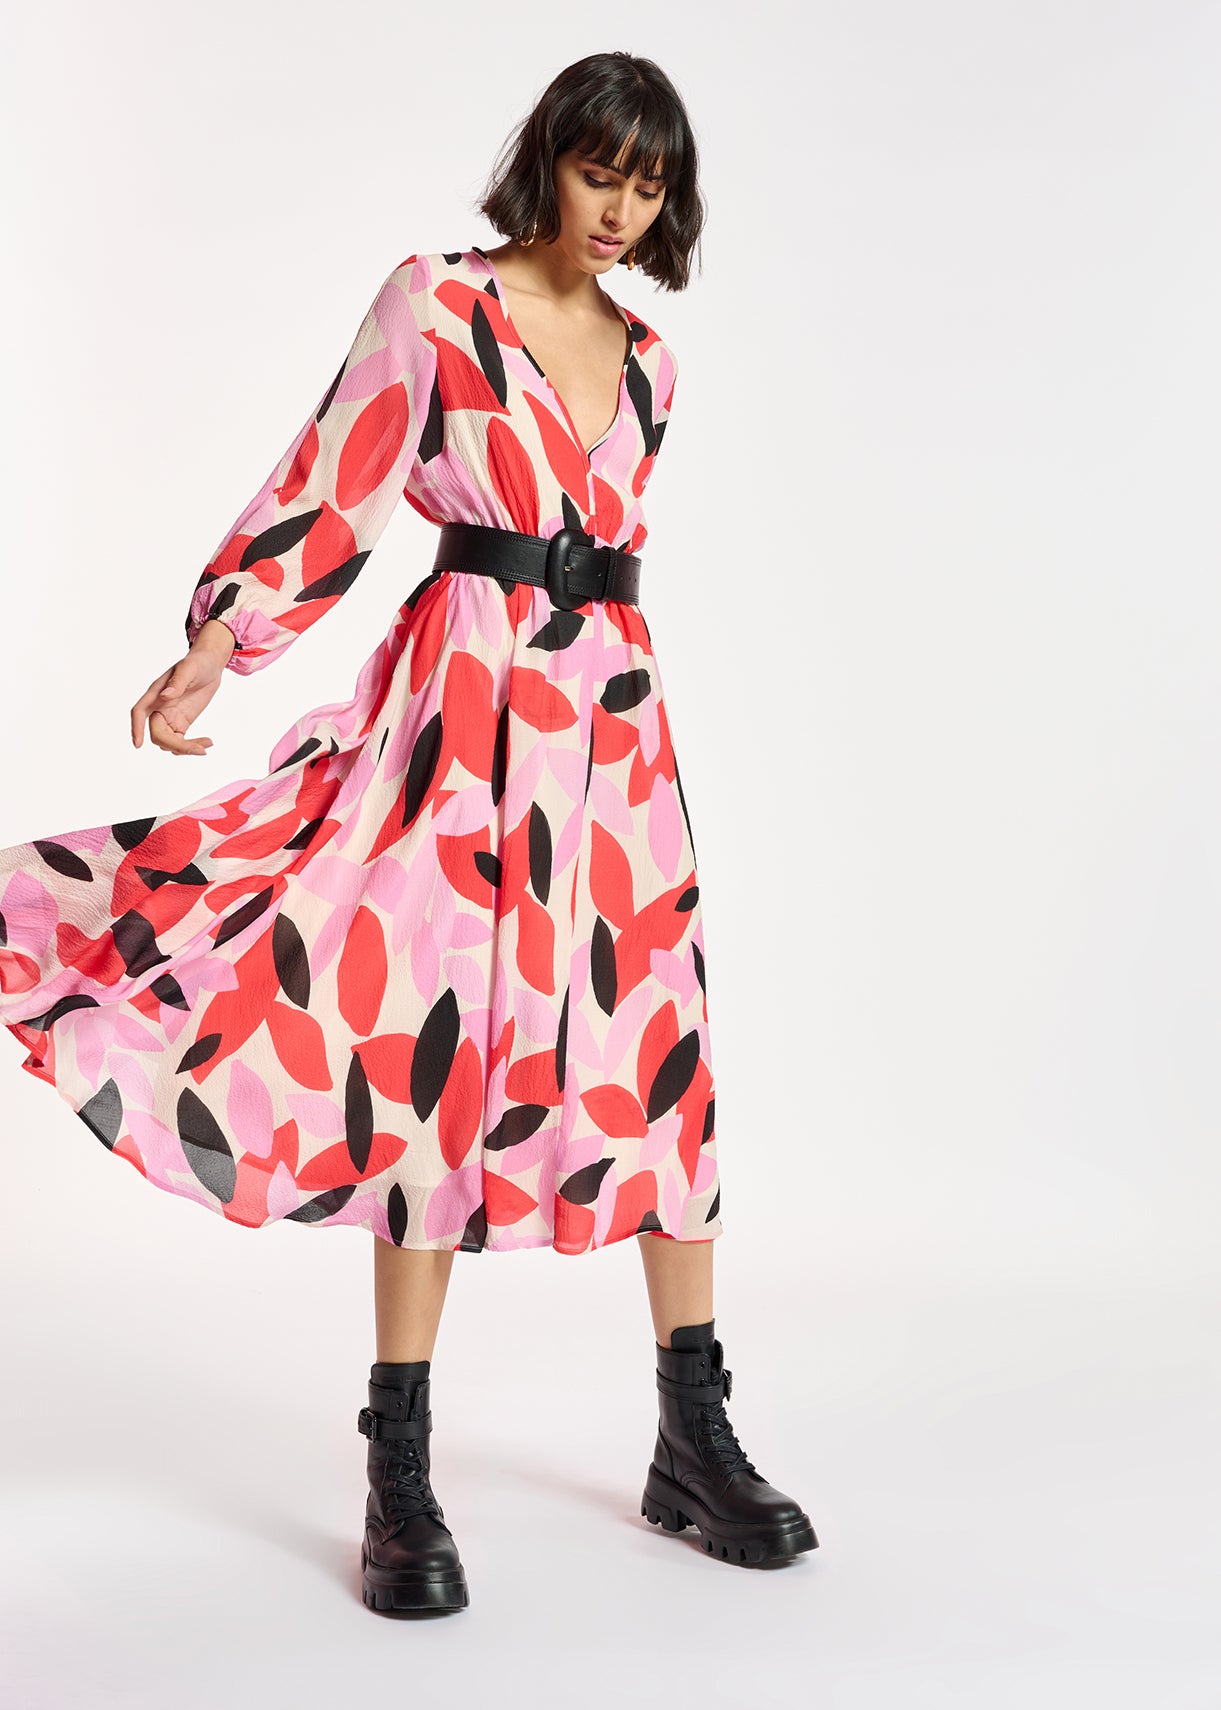 The model is wearing a luxurious Crab Puff Sleeve Dress - Multi by Essentiel Antwerp in a pink and black floral print.